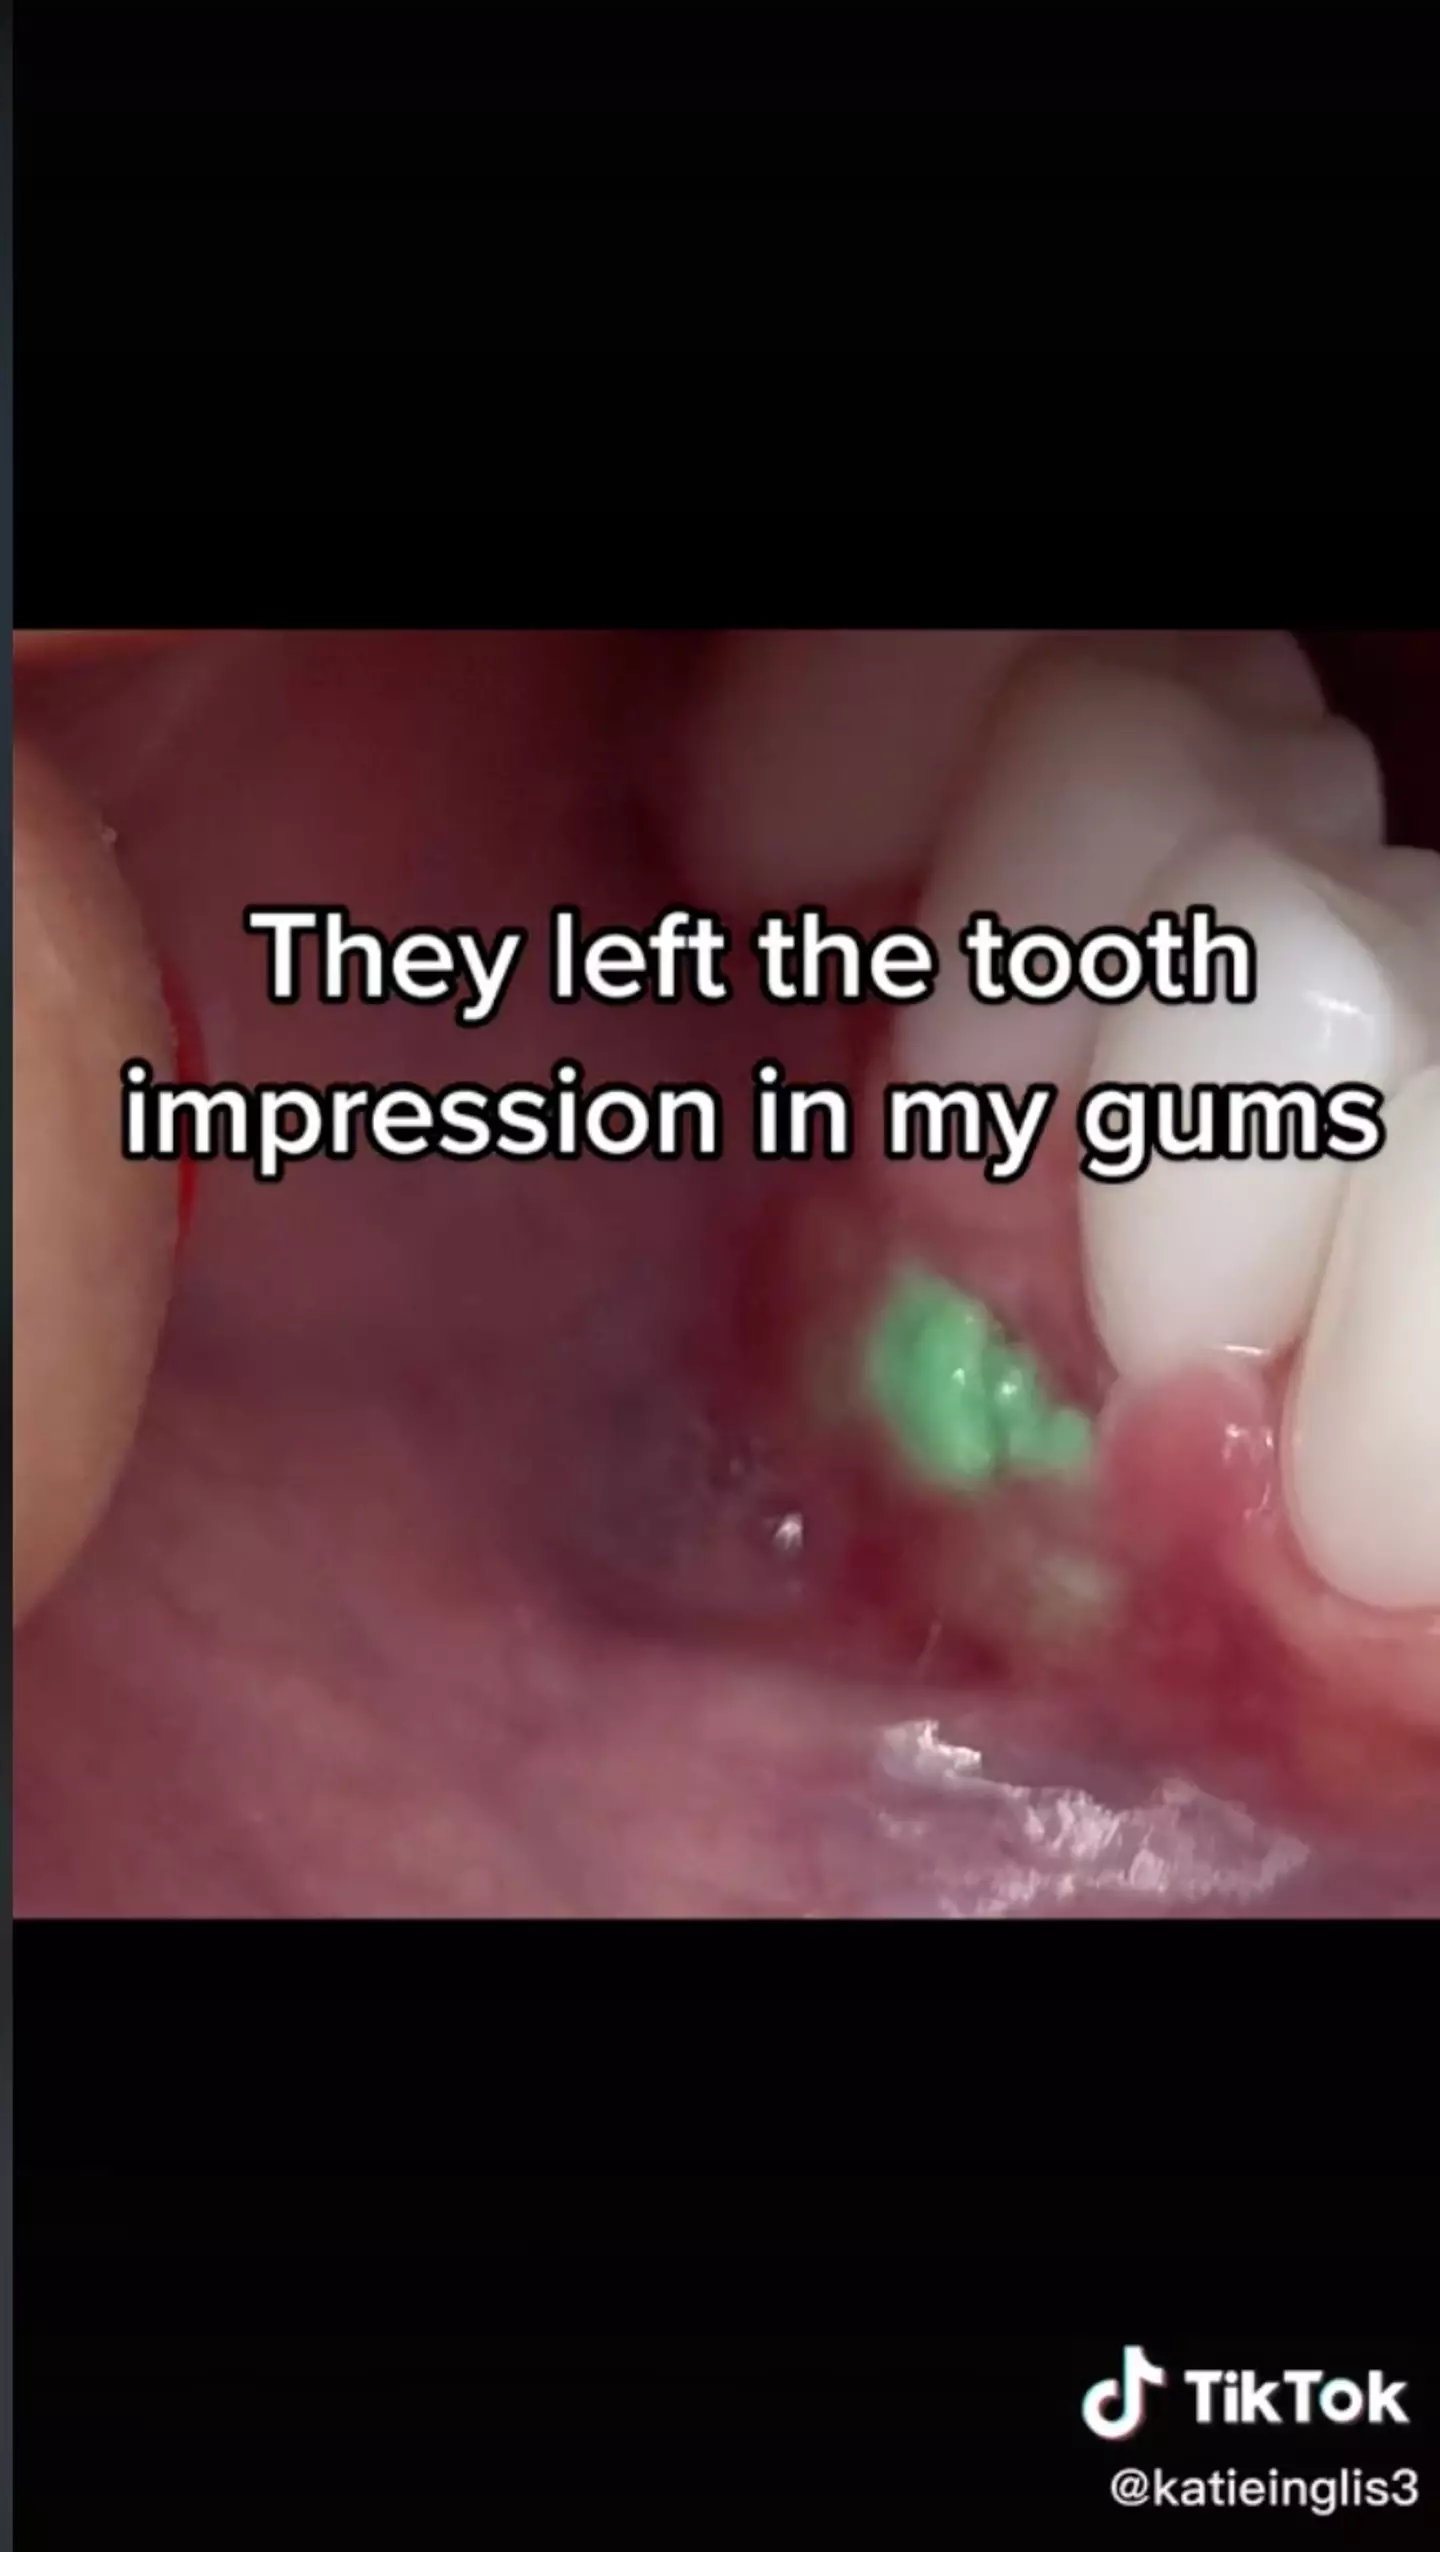 Her gums were visibly left filled with green putty.